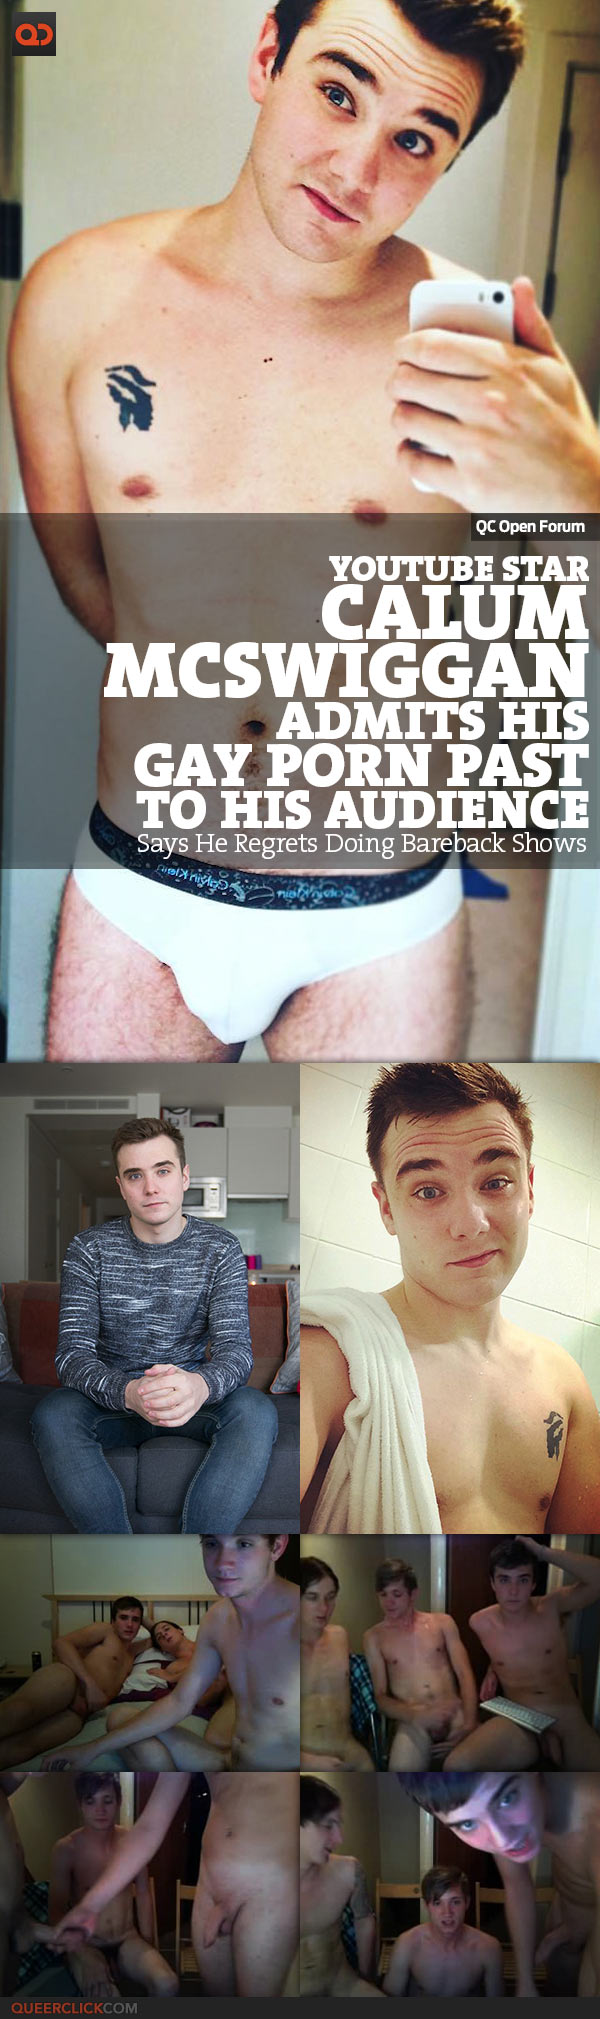 QC Open Forum: YouTube Star Calum McSwiggan Admits His Gay Porn Past To His  Audience, Says He Regrets Doing Bareback Shows - QueerClick